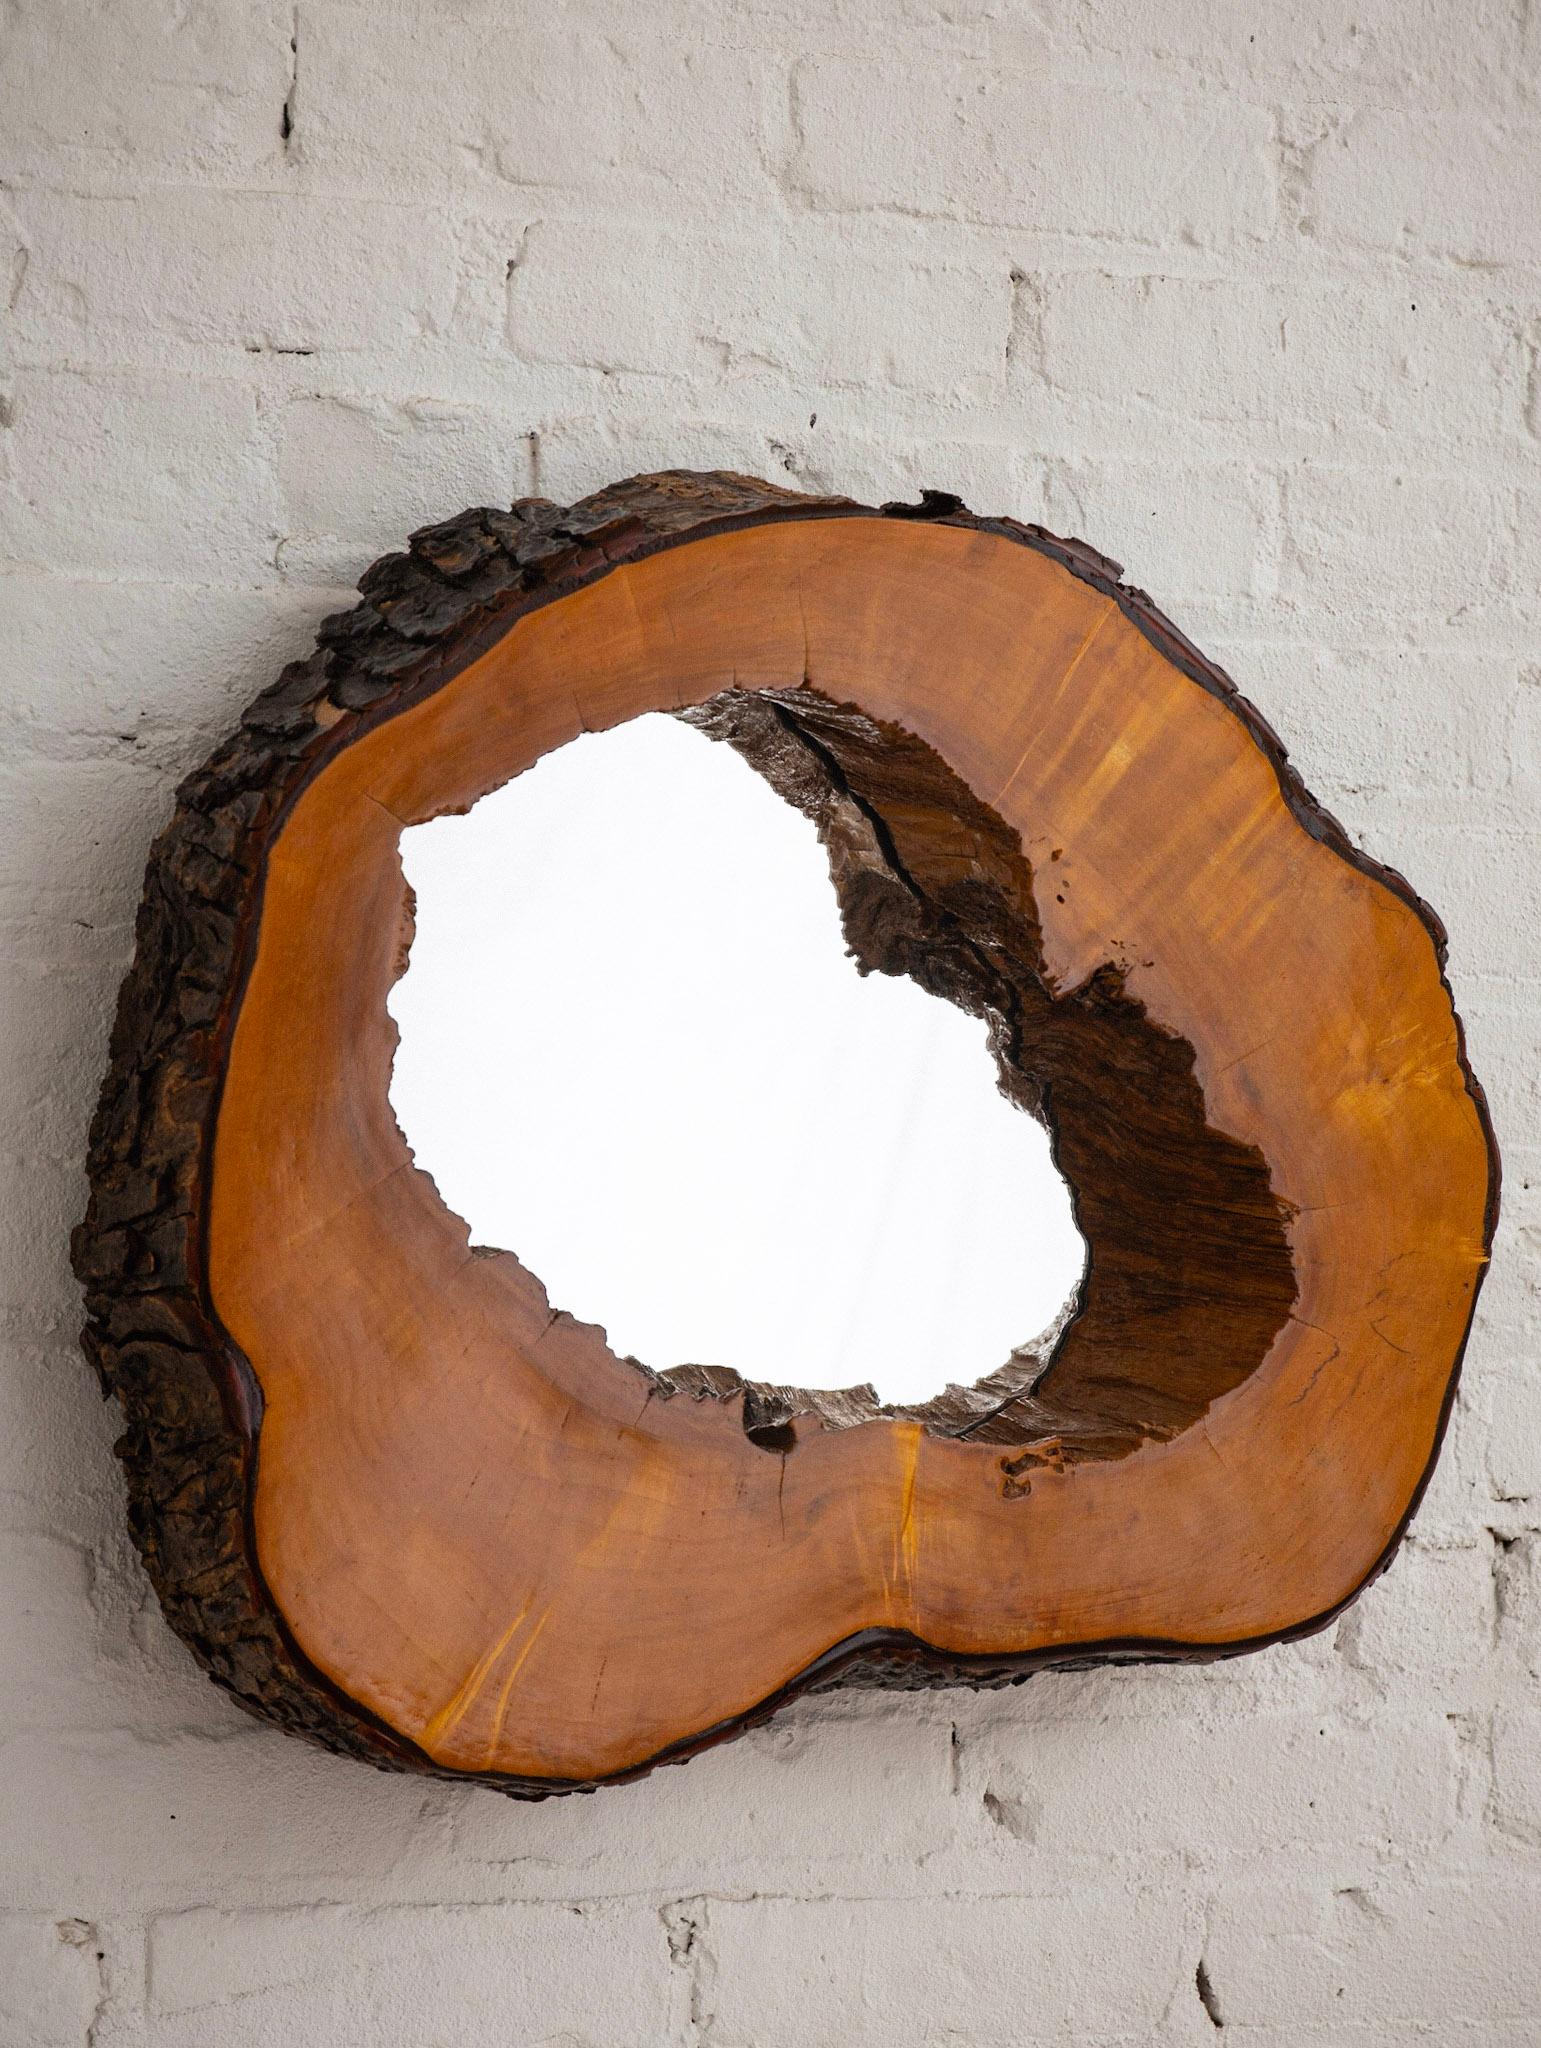 Mid-century studio made mirror. Live edge wood with a lacquered finish. A hollowed log slice has been used to create the frame around the mirror. Original natural bark on outer edges.